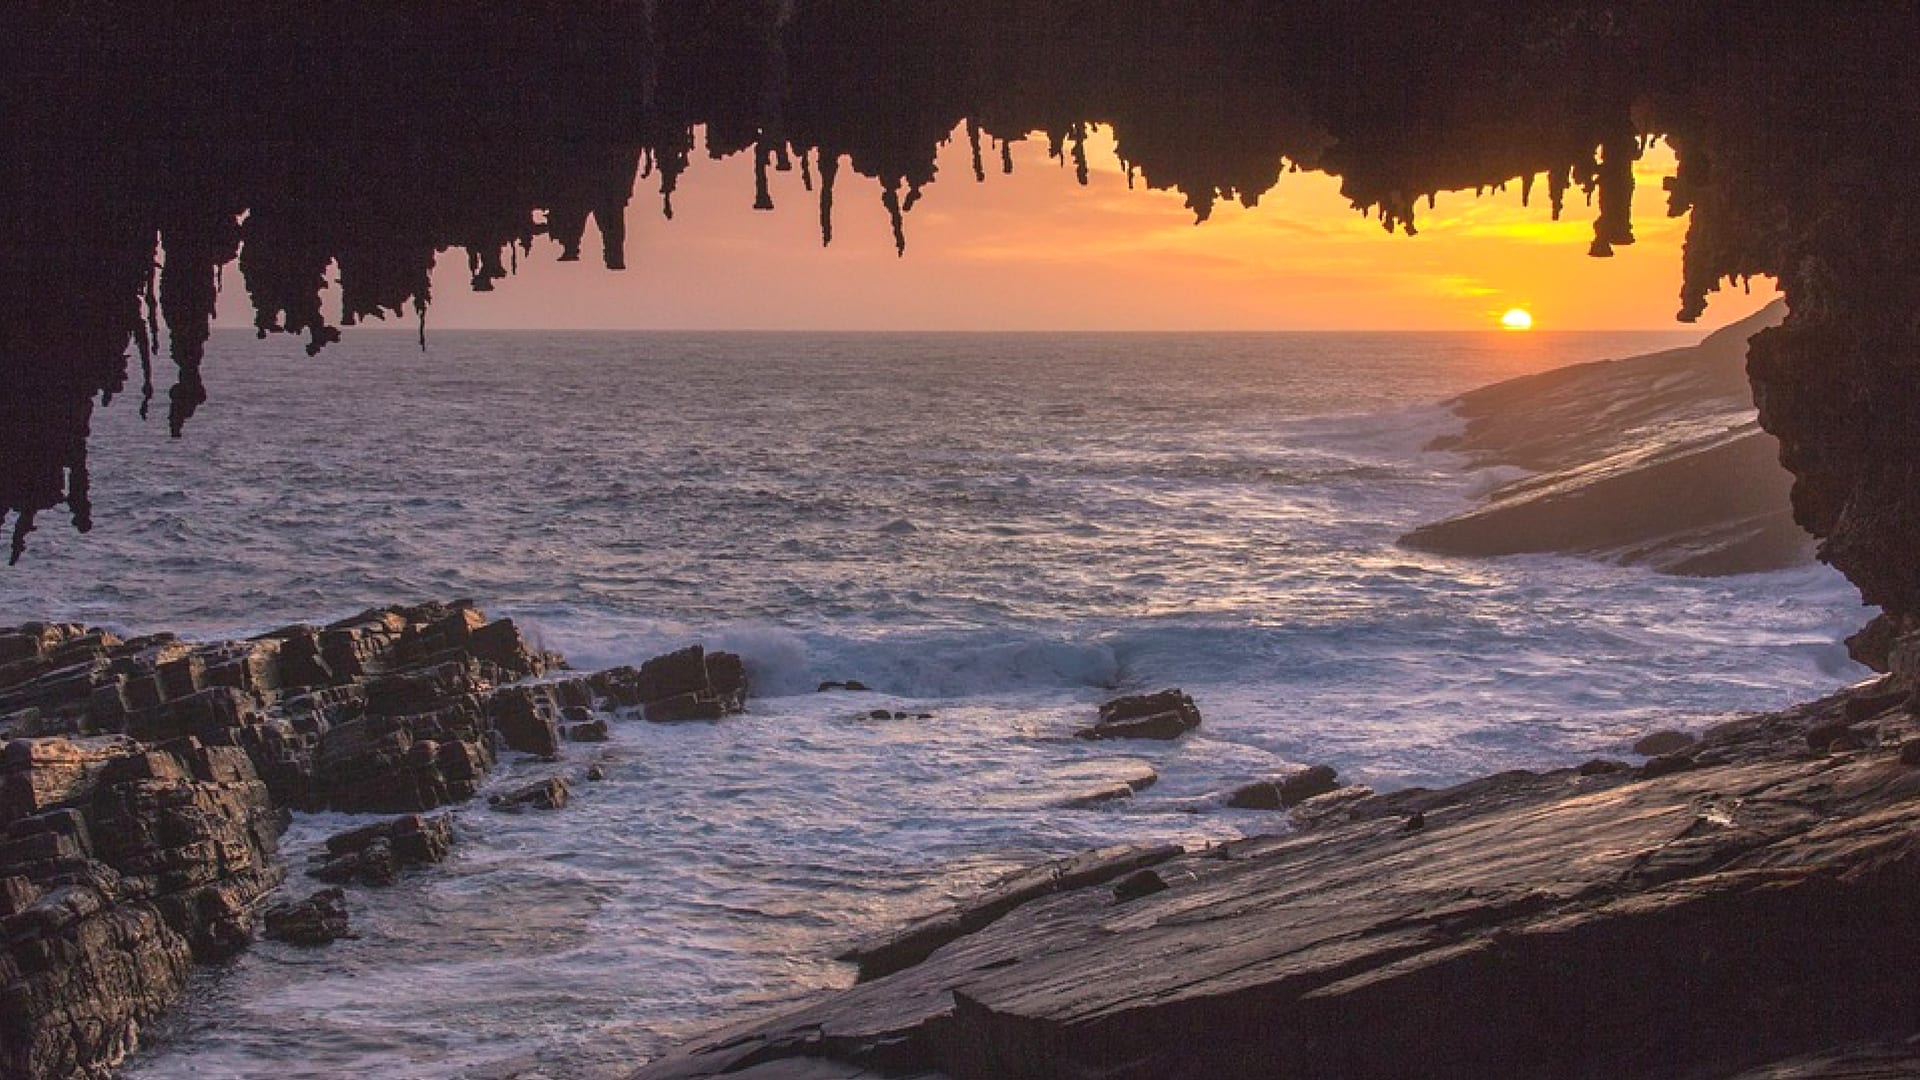 Visit Australia for: The view out to sea from a cave on Kangaroo Island